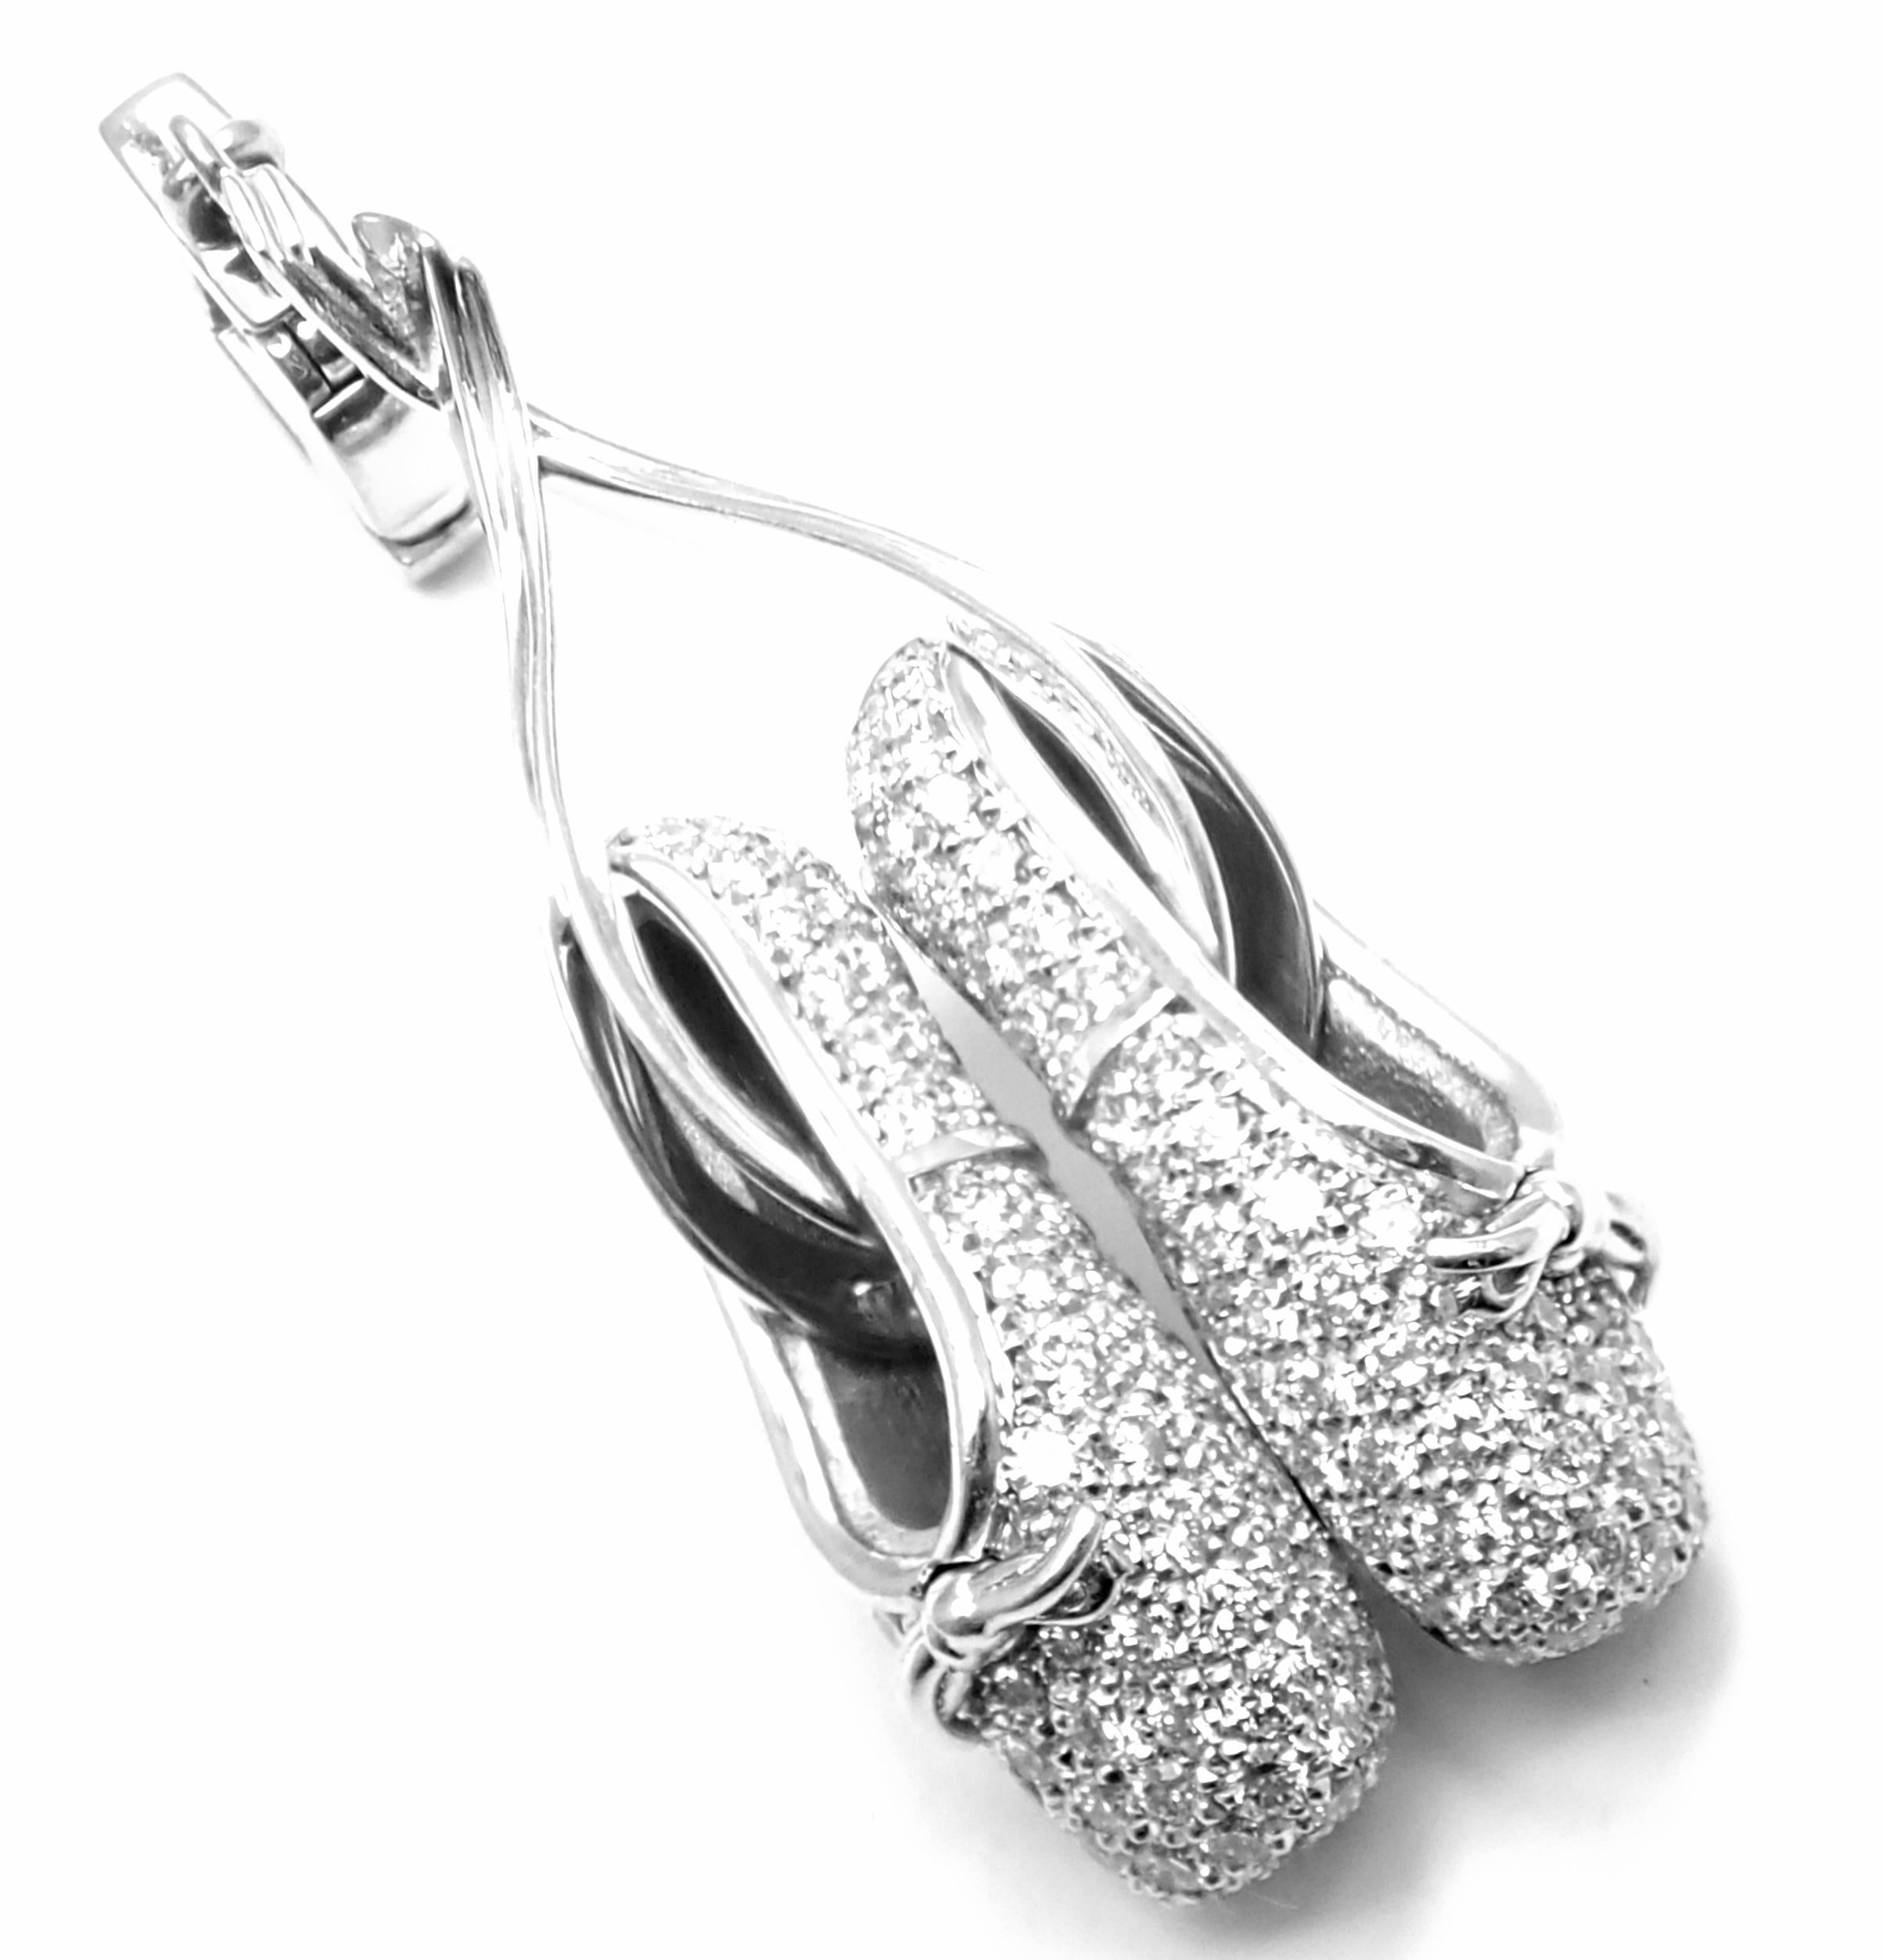 18k White Gold Diamond Ballet Shoes Charm Pendant by Louis Vuitton. 
With 204 round brilliant cut diamonds VVS1 clarity, E color total weight approximately 2.5ct
On sale from Louis Vuitton as a tribute to Moscow’s Bolshoi ballet company, it’s
made